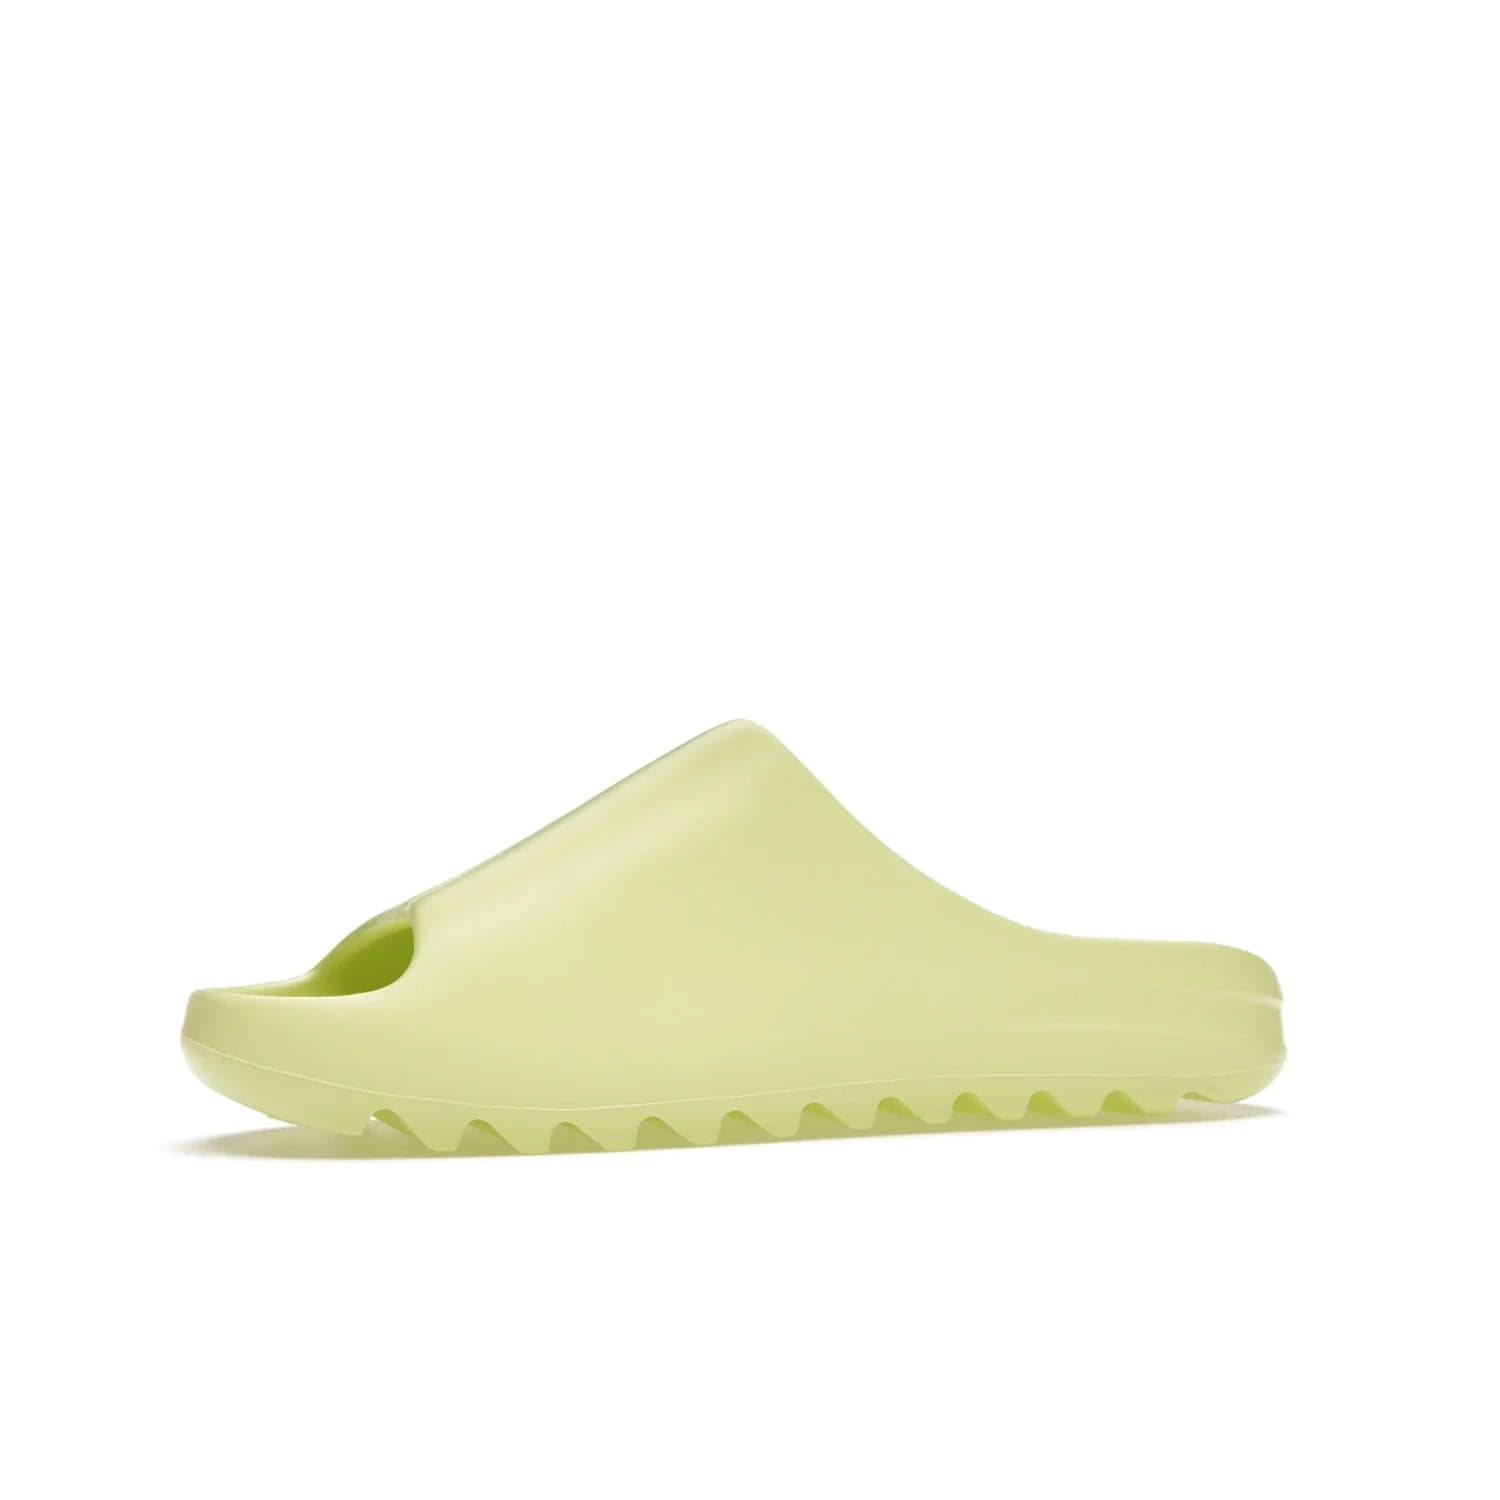 adidas Yeezy Slide Glow Green - Image 17 - Only at www.BallersClubKickz.com - Experience an unexpected summer style with the adidas Yeezy Slide Glow Green. This limited edition slide sandal provides a lightweight and durable construction and a bold Glow Green hue. Strategic grooves enhance traction and provide all-day comfort. Make a statement with the adidas Yeezy Slide Glow Green.